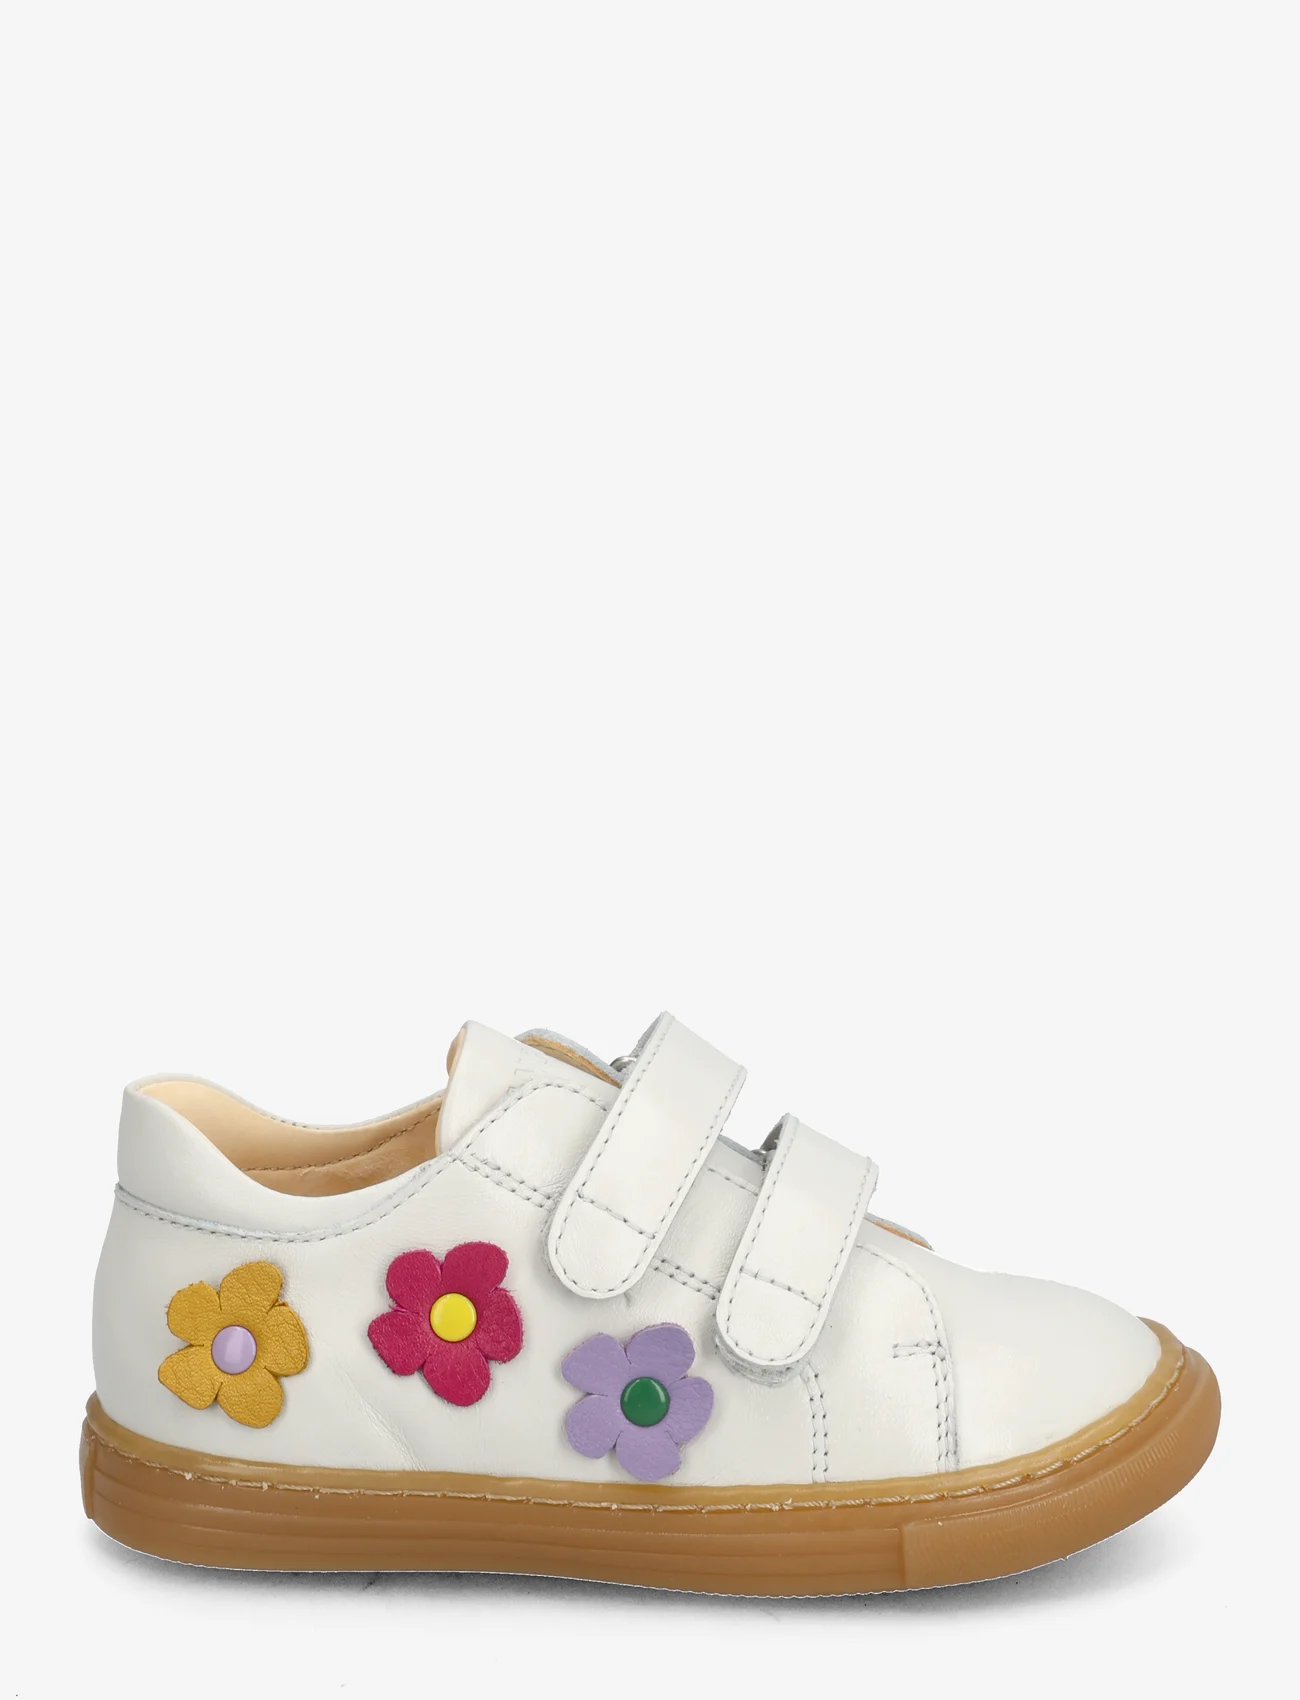 ANGULUS - Shoes - flat - with velcro - sommerkupp - 1493/a001 off white/flowers - 1